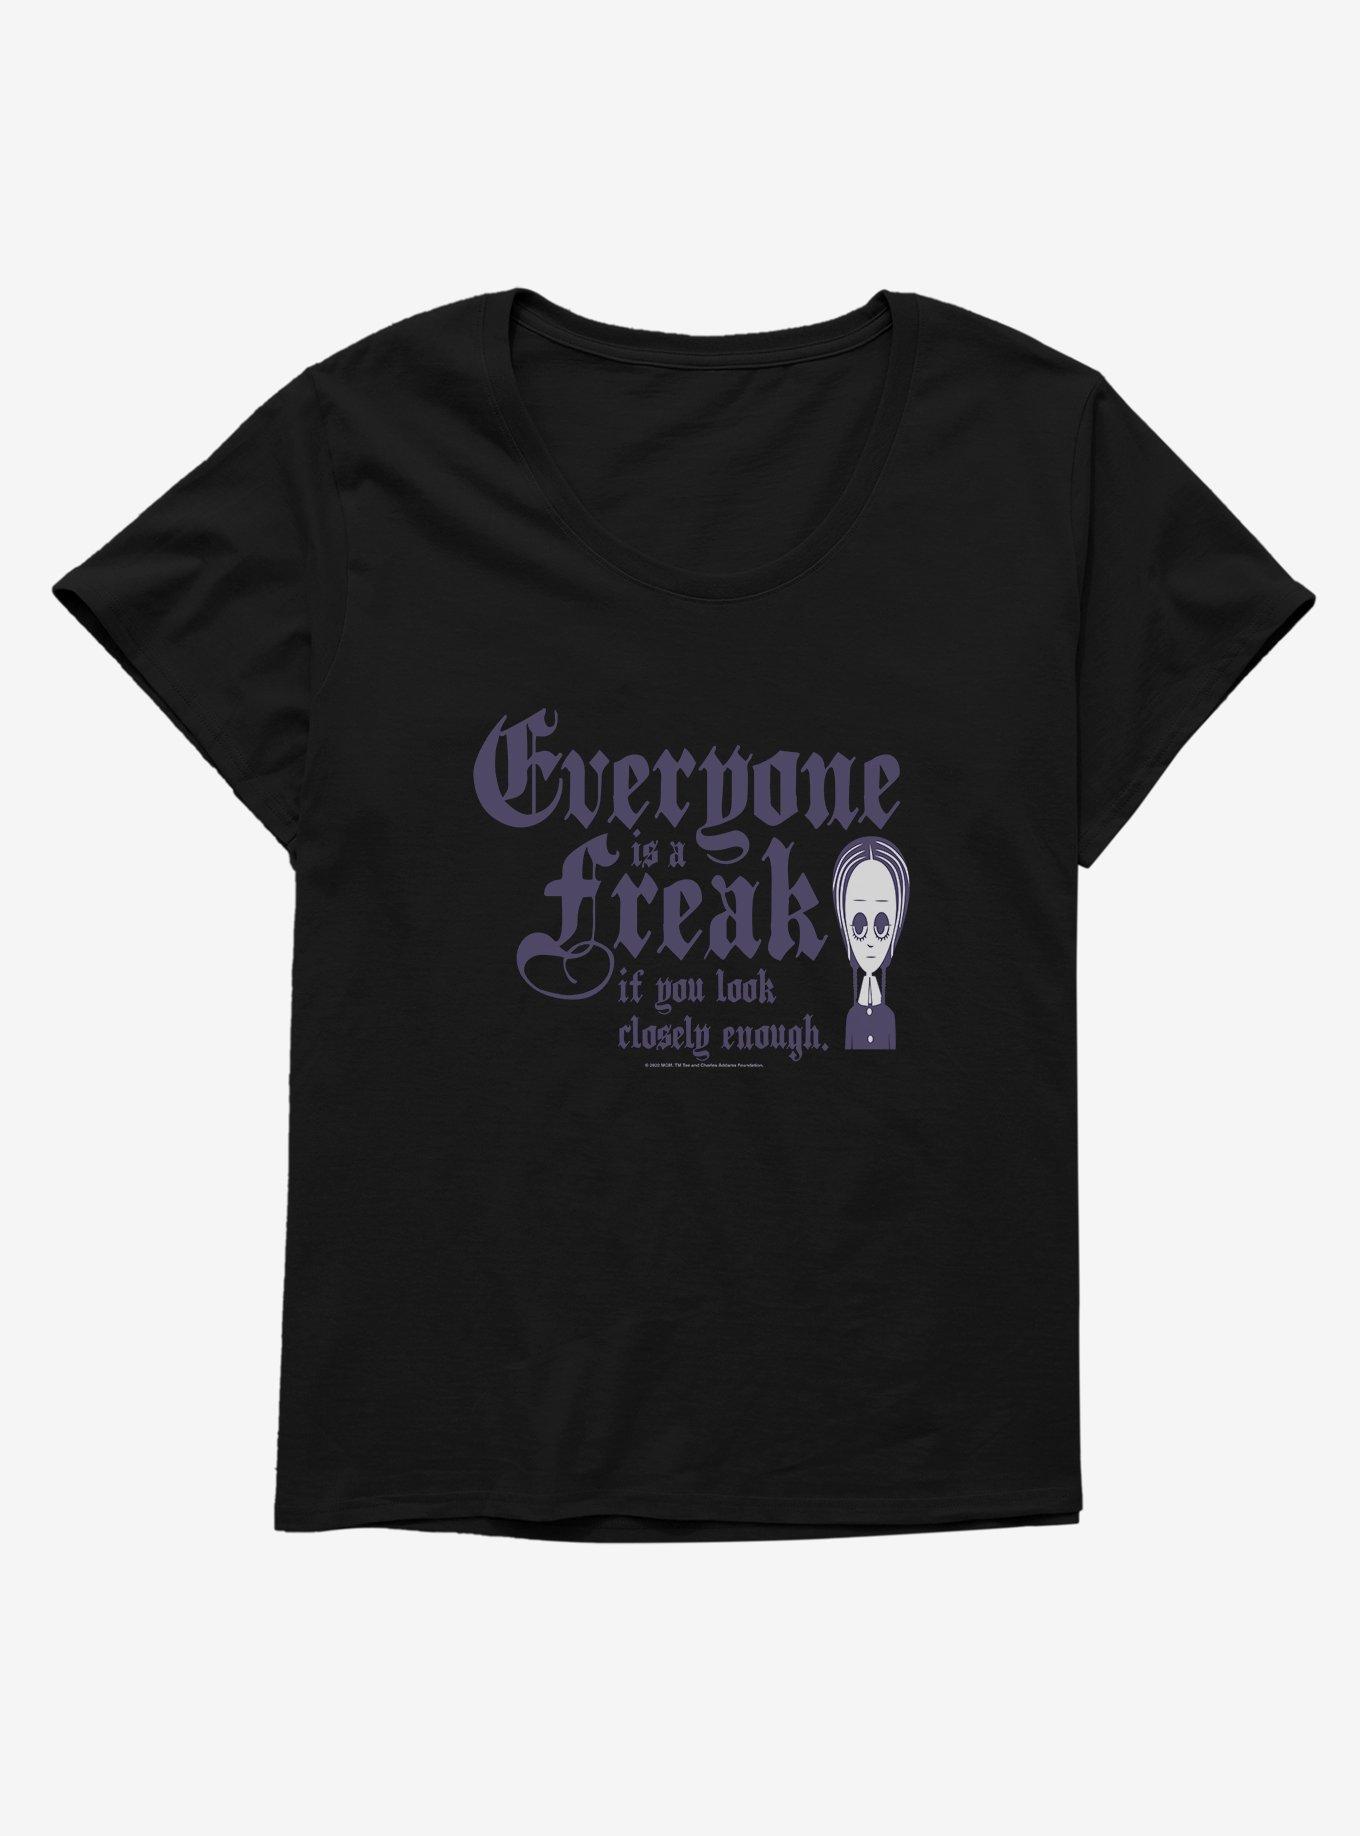 Addams Family Everyone Is A Freak Girls T-Shirt Plus Size, BLACK, hi-res